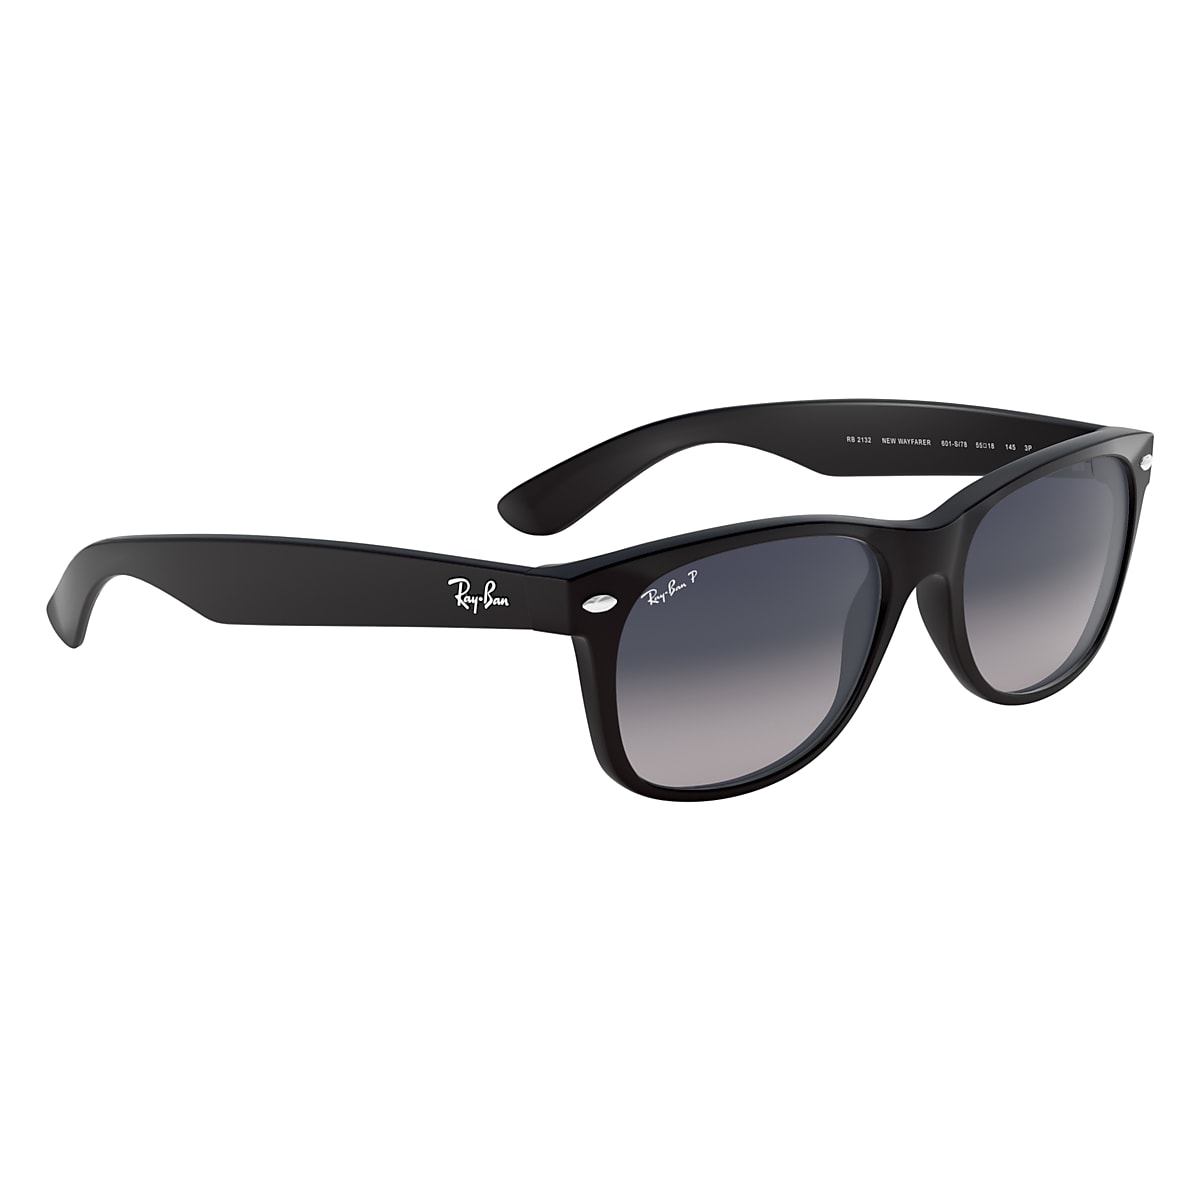 NEW WAYFARER CLASSIC Sunglasses in Black and Blue/Grey - RB2132 